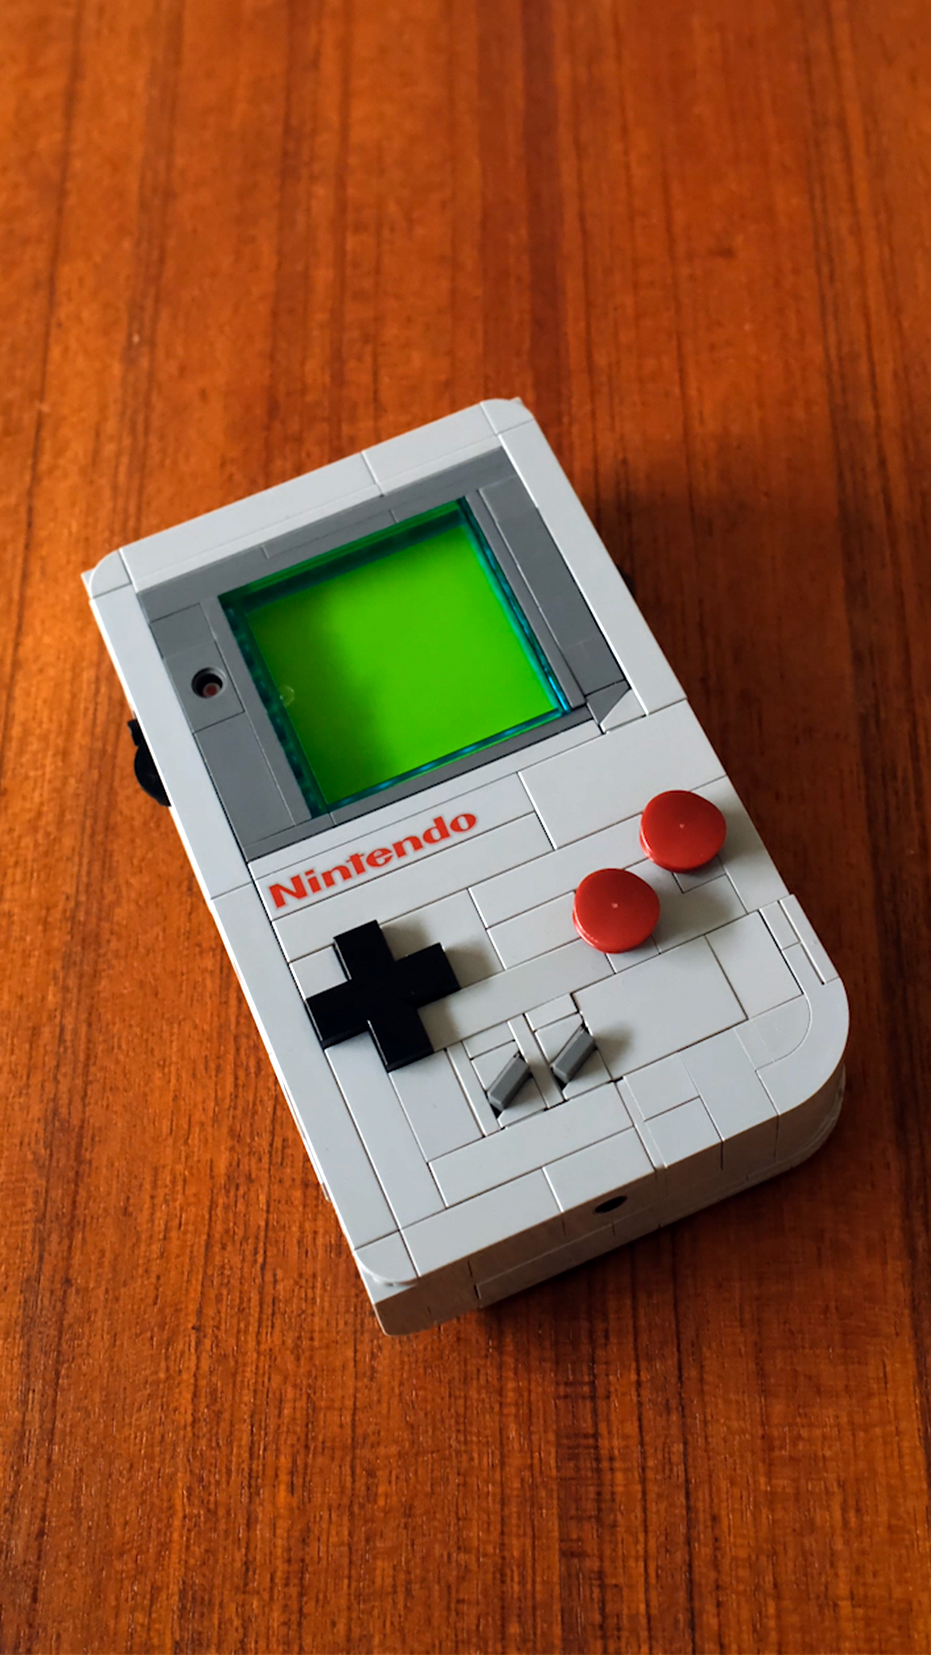 LEGO Gameboy on wooden table